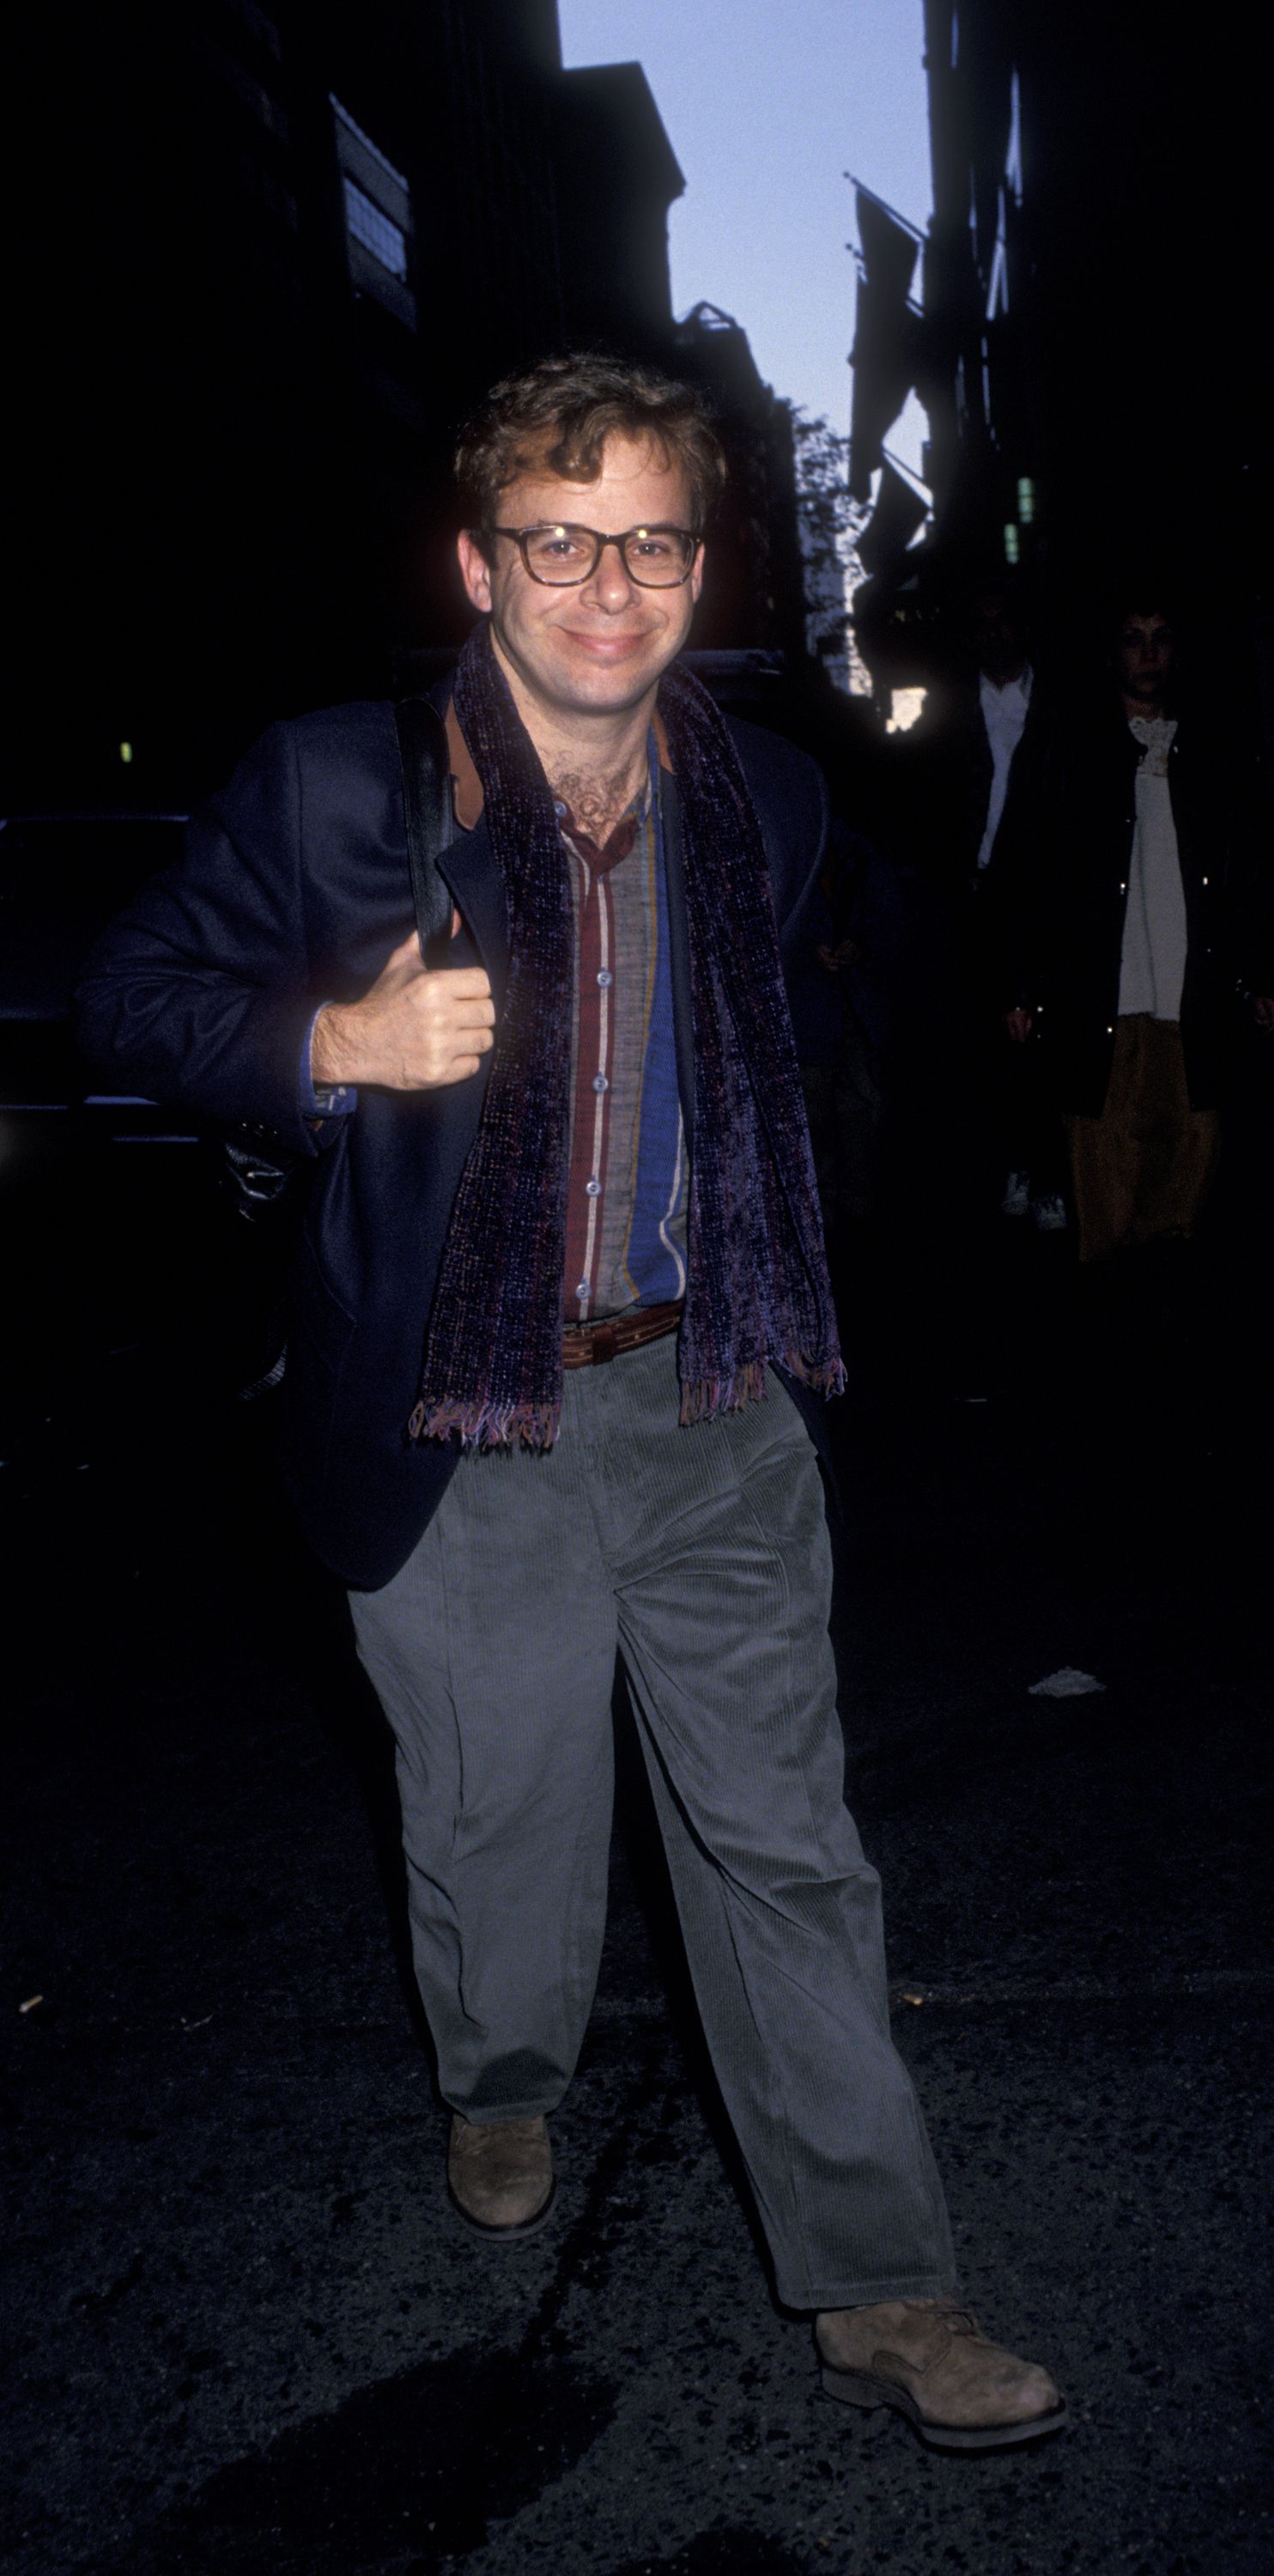 Actor Rick Moranis at the premiere of The Nutcracker on November 21, 1993 | Photo: Getty Images